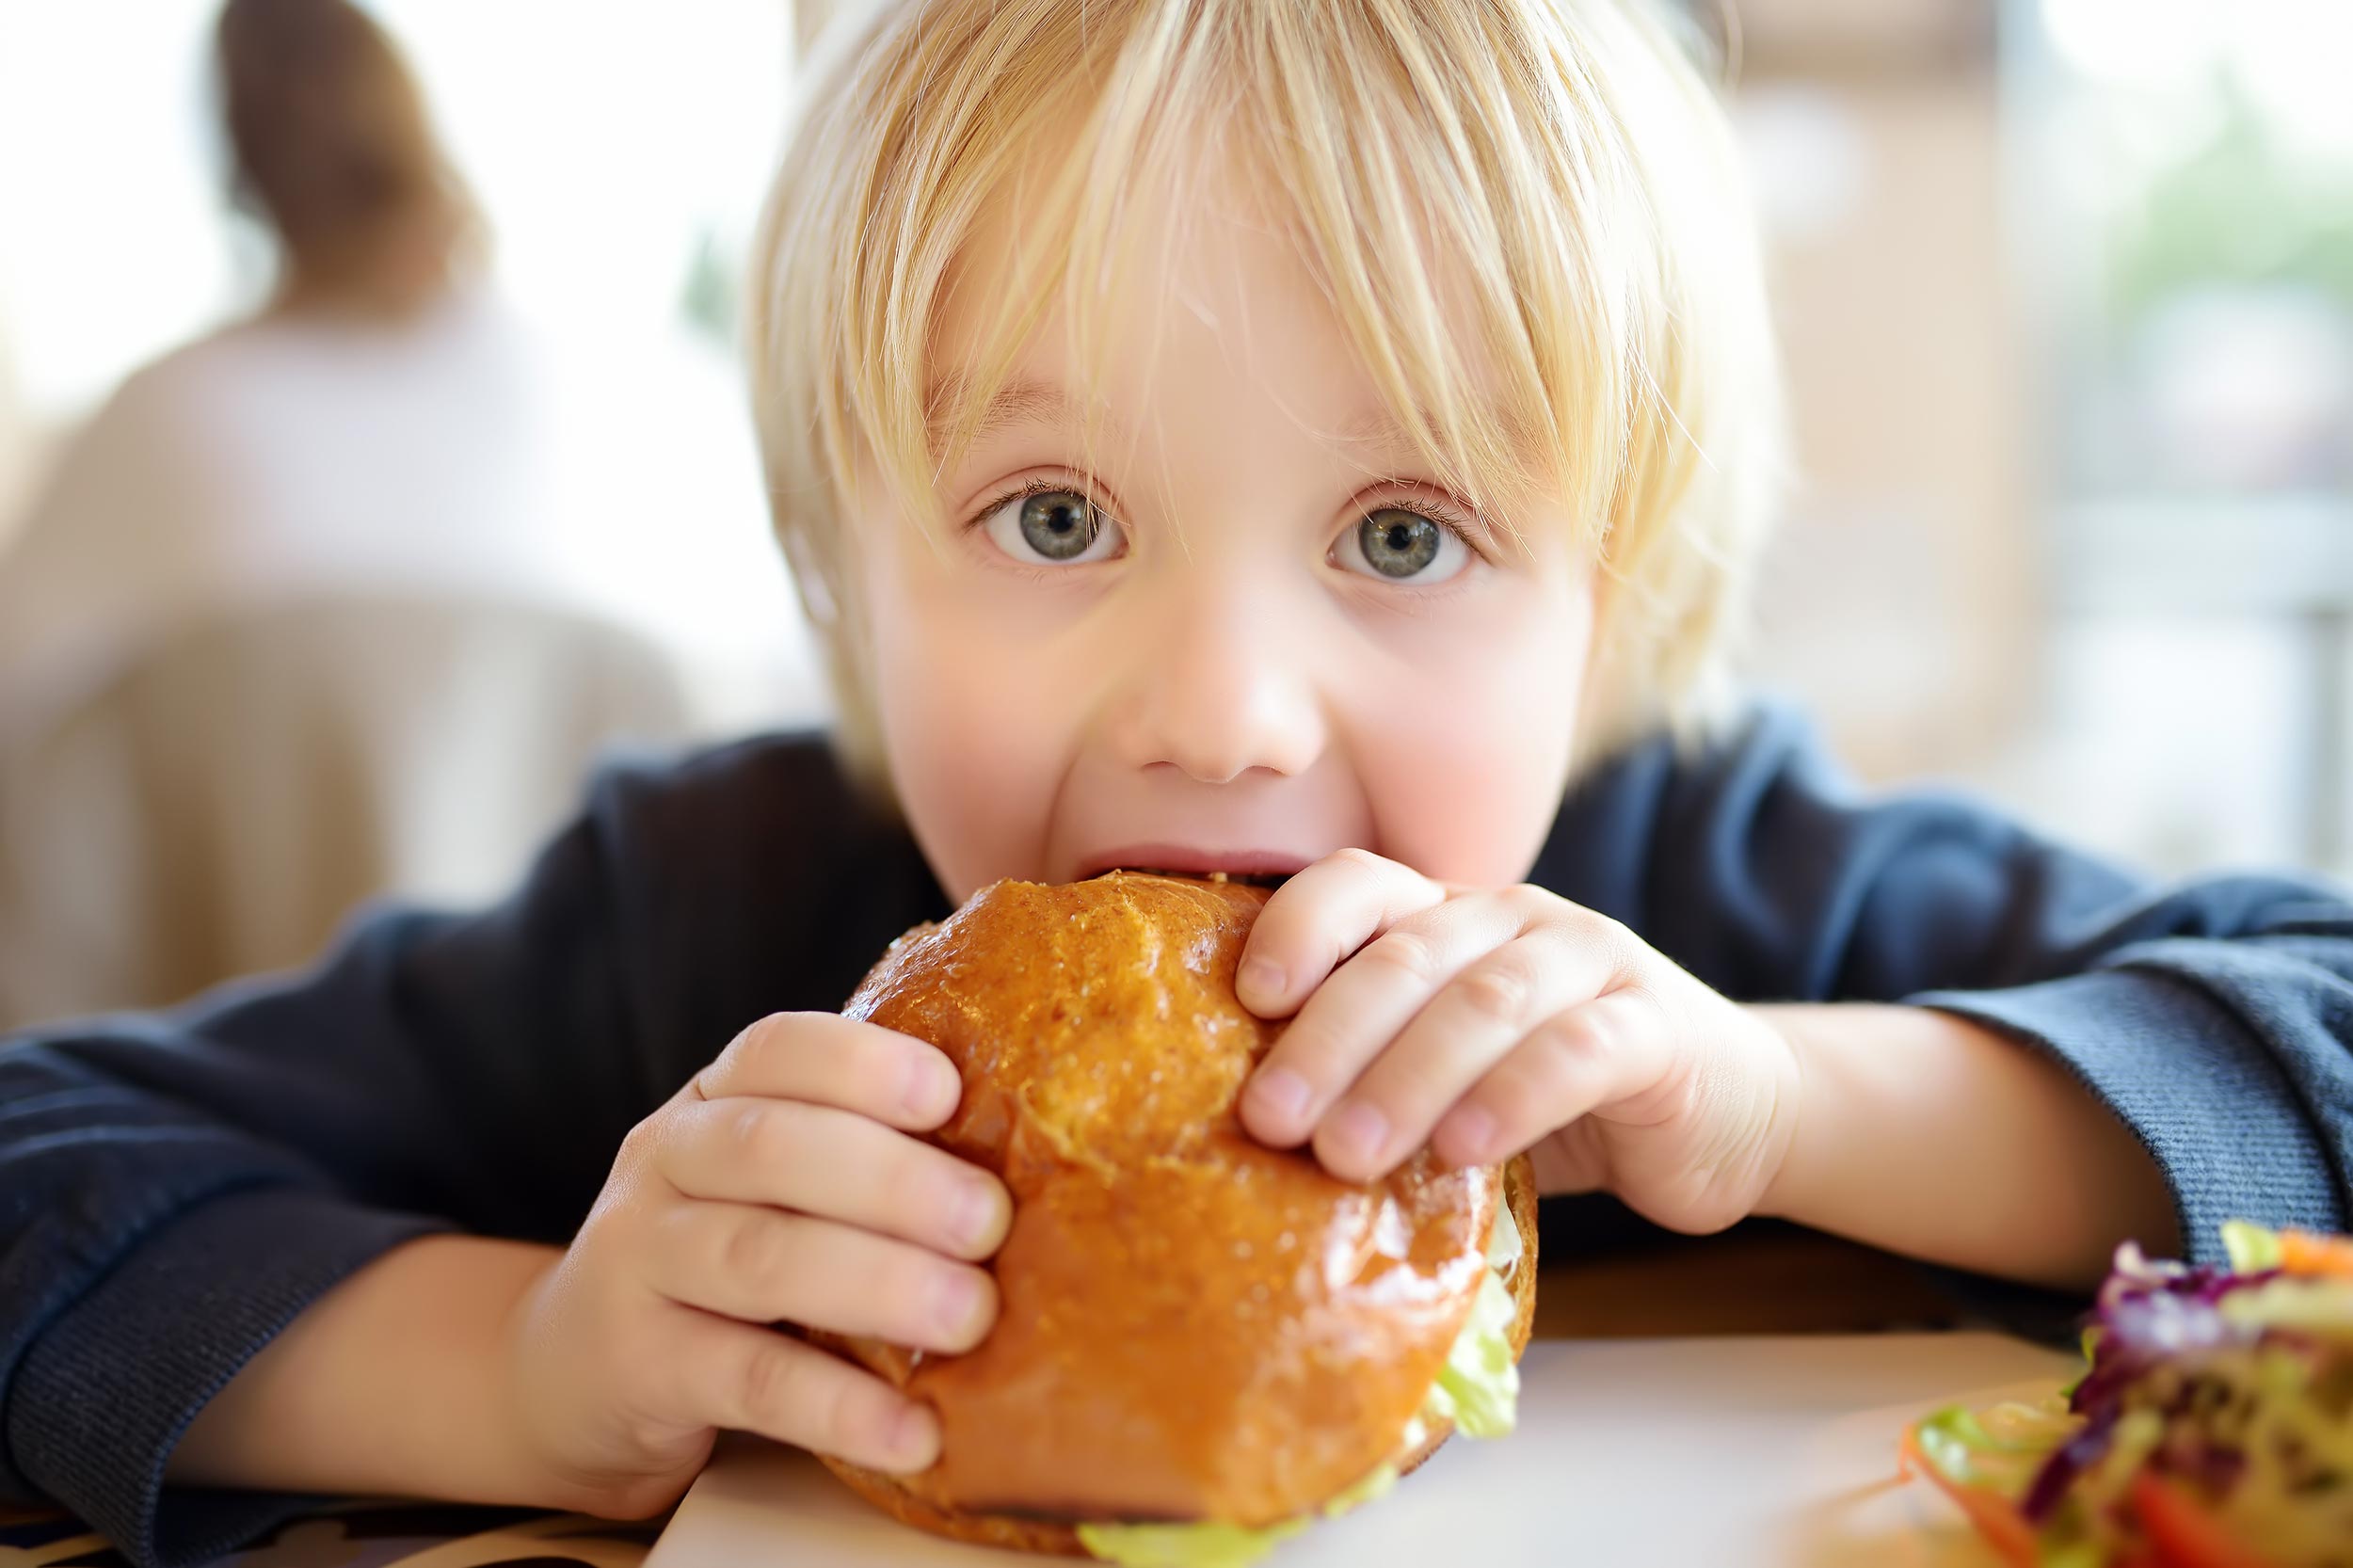 Child eating burger in hotel on holiday